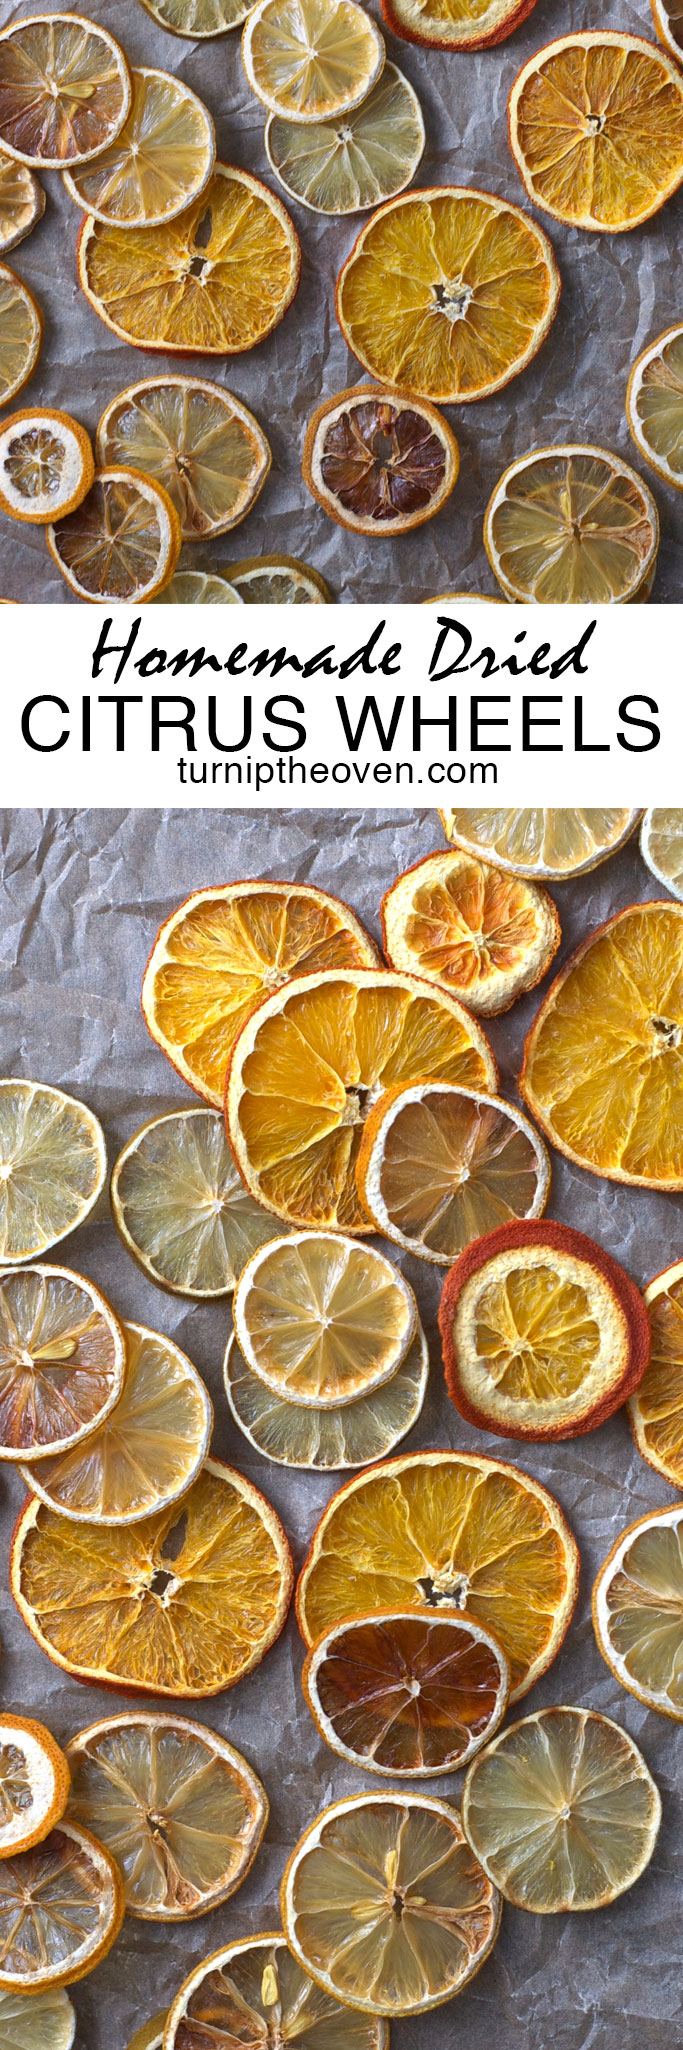 These homemade dried citrus wheels are a fantastic DIY project! Use them to make flavored salts and sugars, decorate cakes, or dip them in chocolate. They are gluten-free, vegan, and all-natural, too!